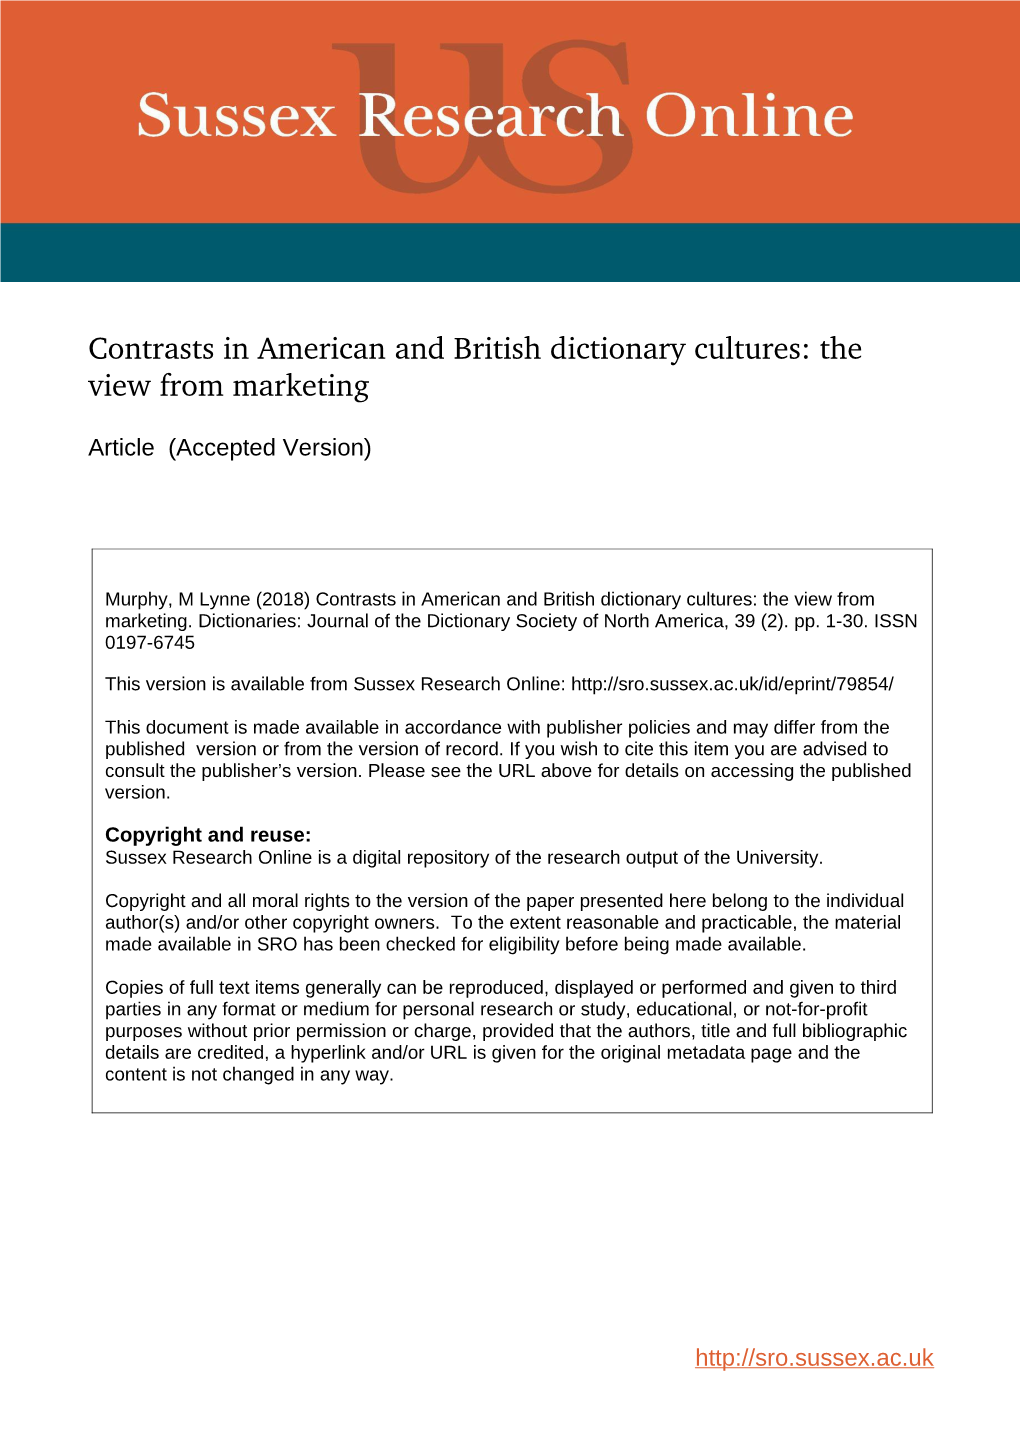 Contrasts in American and British Dictionary Cultures: the View from Marketing